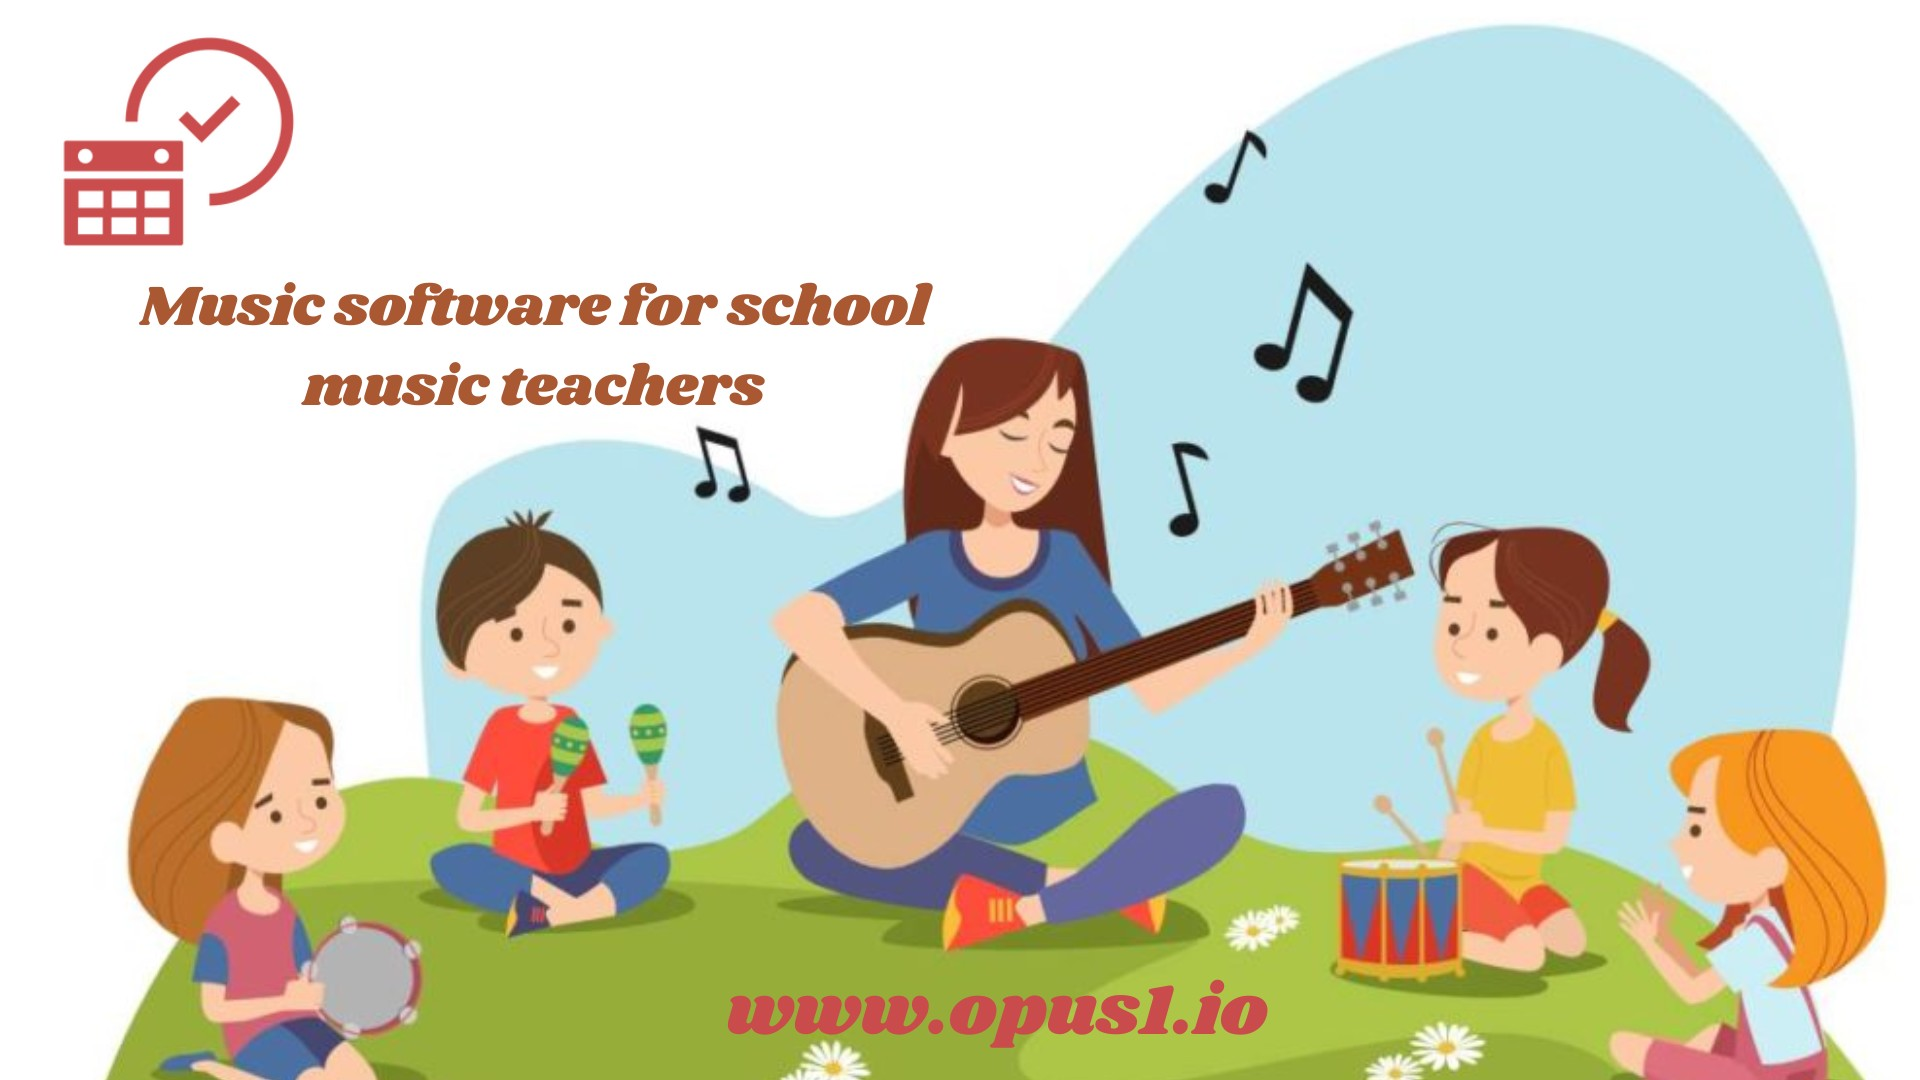 Opus1: Your All-in-One Music School Management Symphony